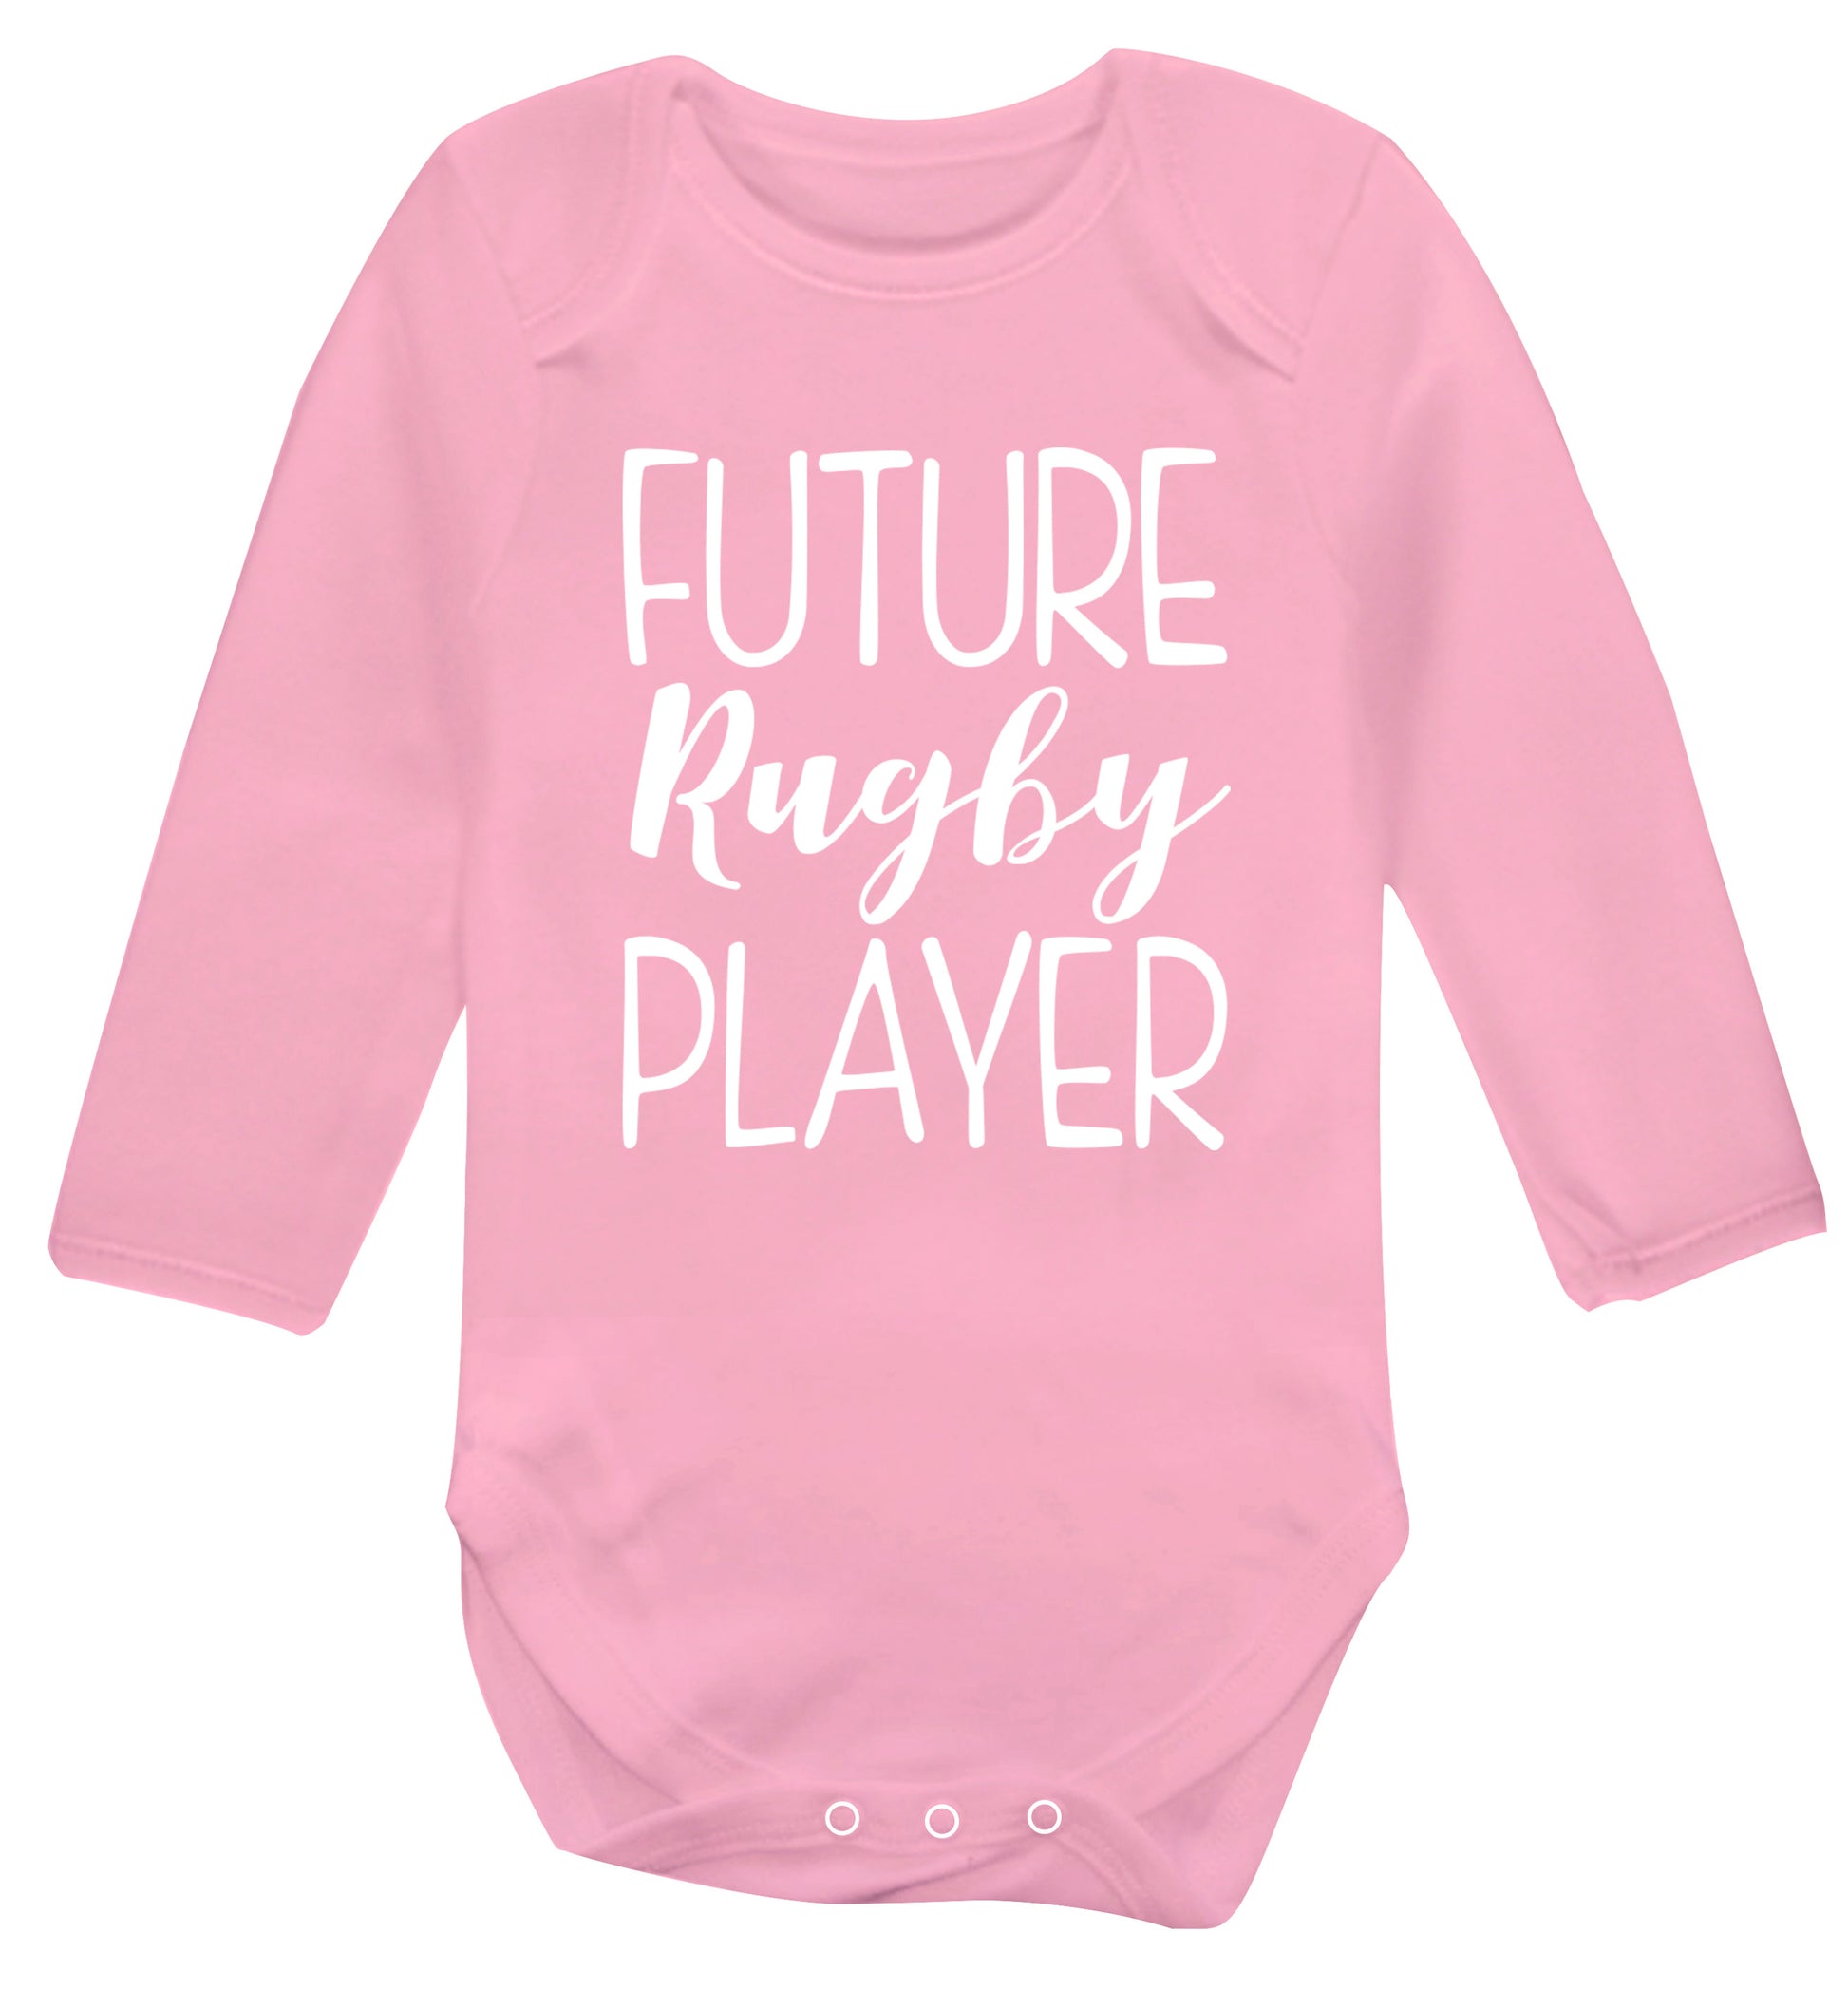 Future rugby player Baby Vest long sleeved pale pink 6-12 months